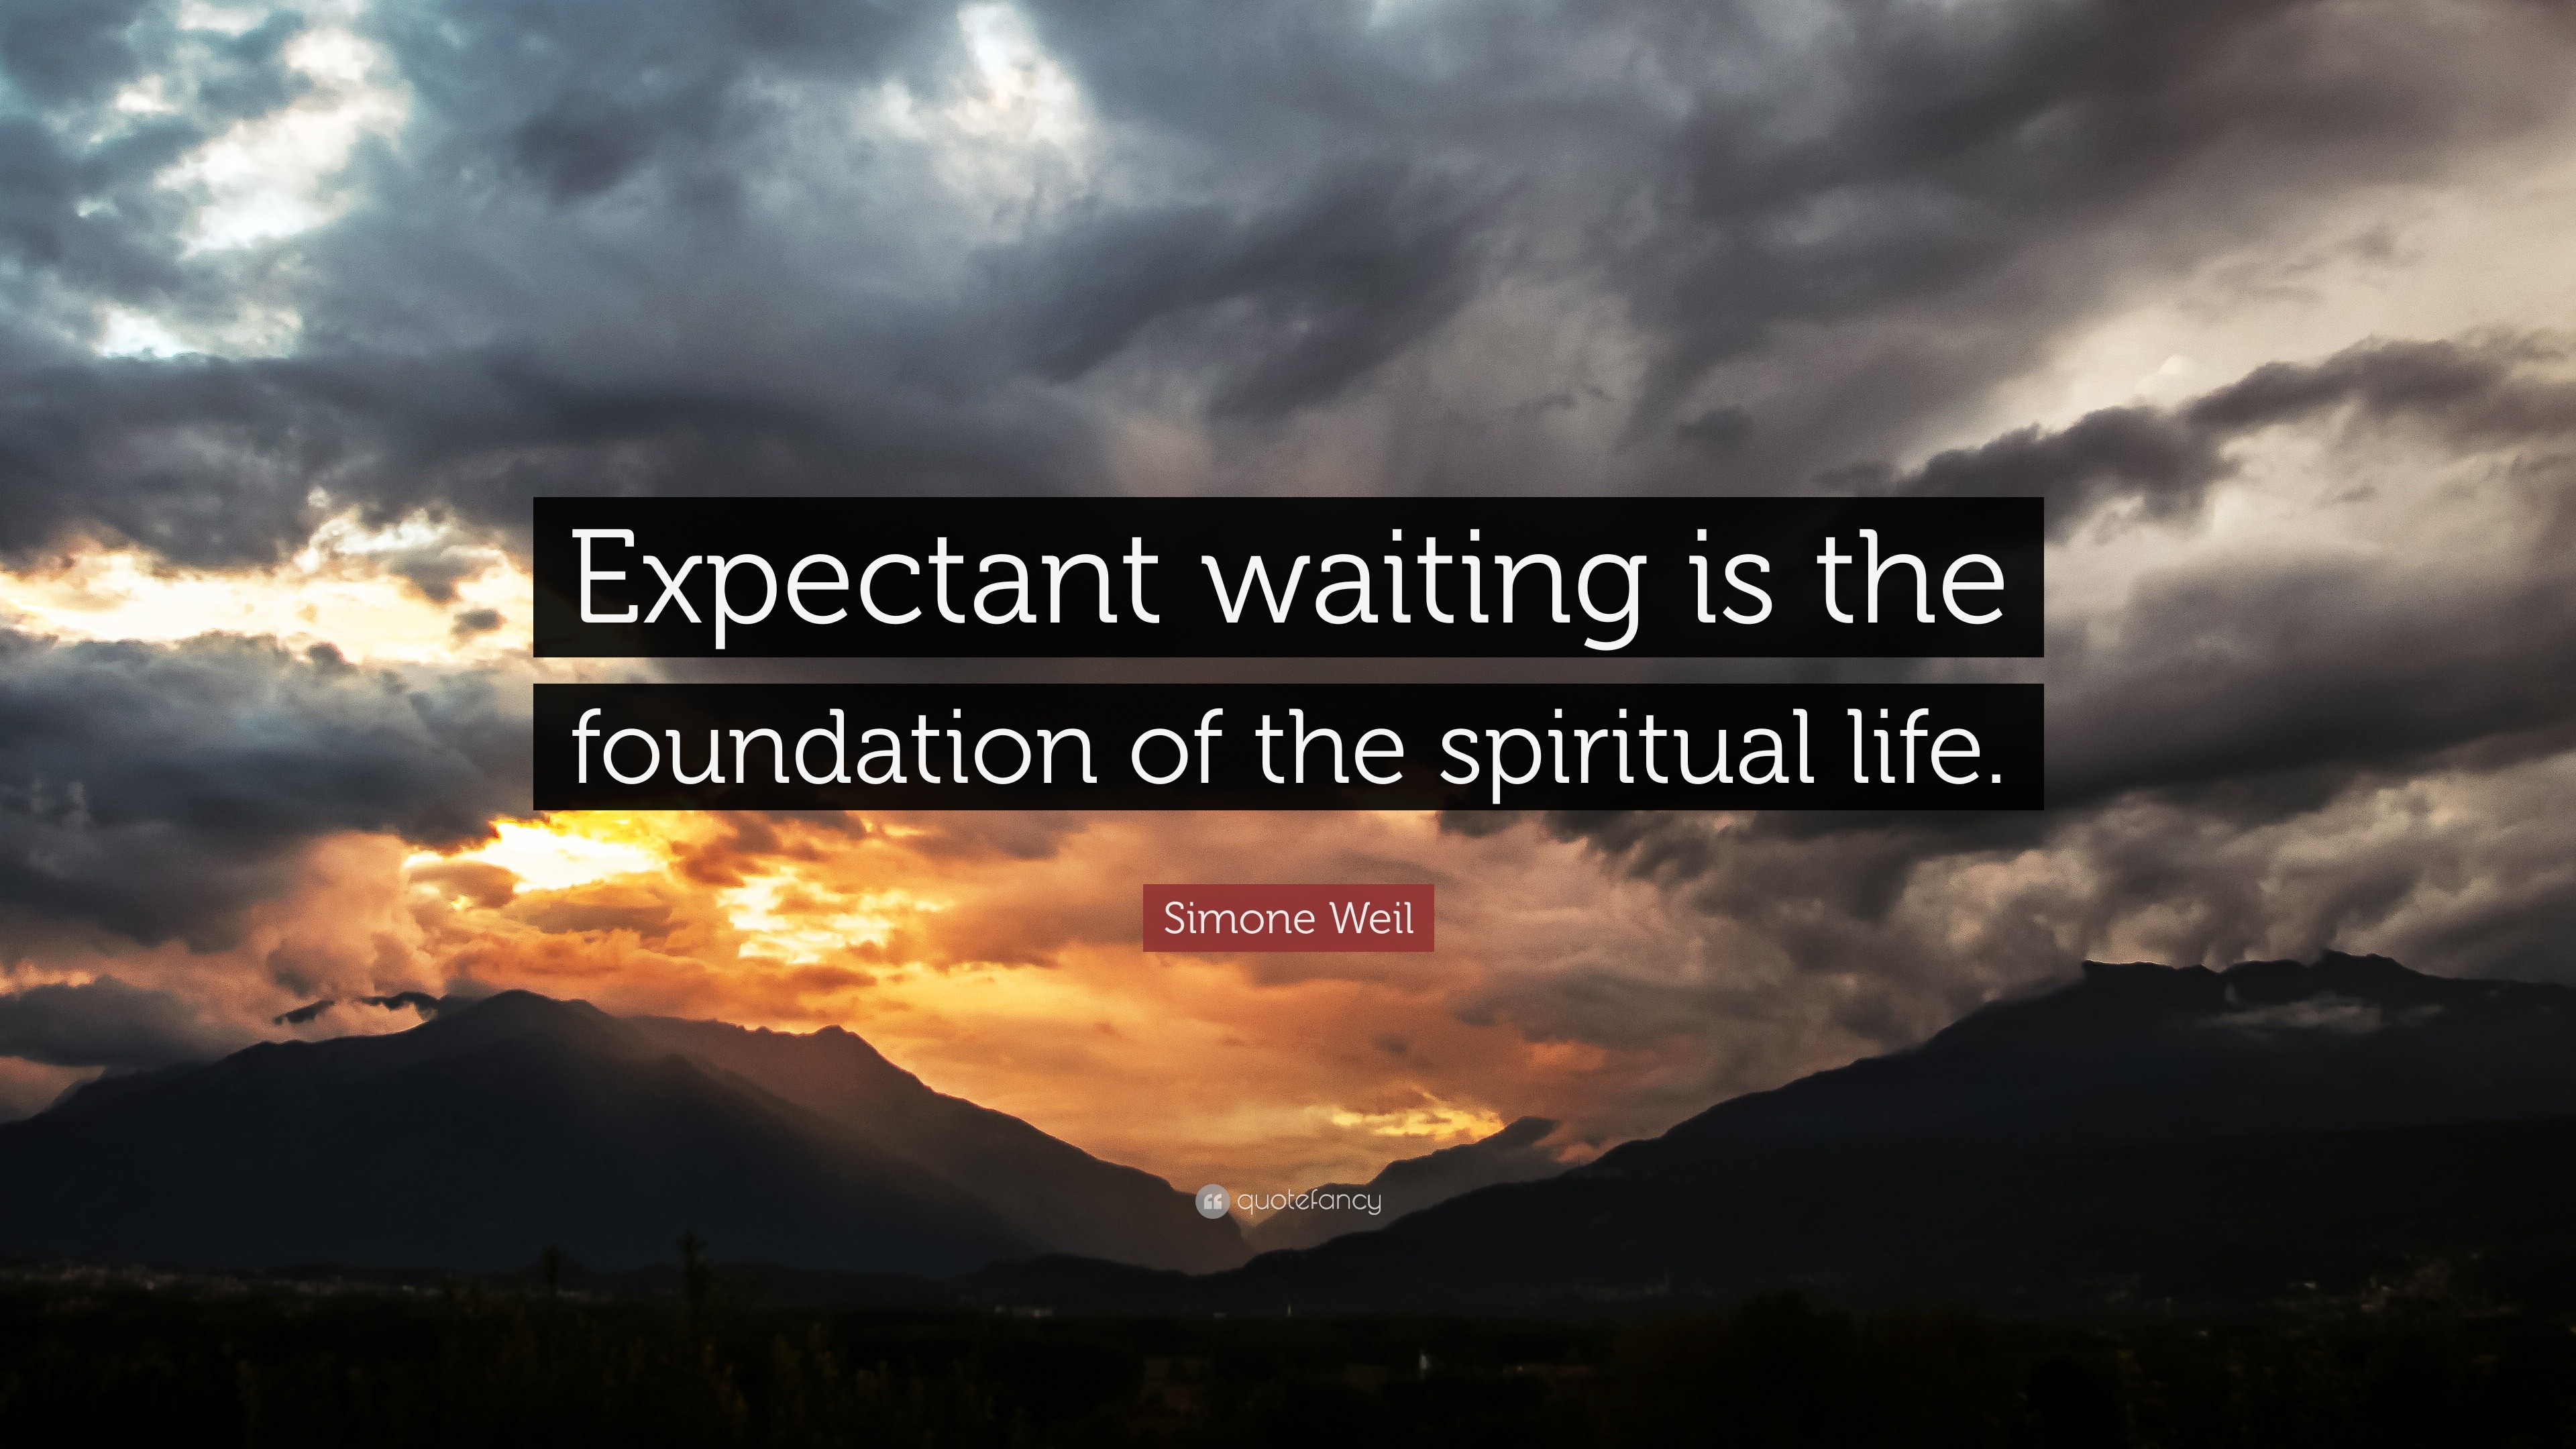 https://quotefancy.com/media/wallpaper/3840x2160/543536-Simone-Weil-Quote-Expectant-waiting-is-the-foundation-of-the.jpg